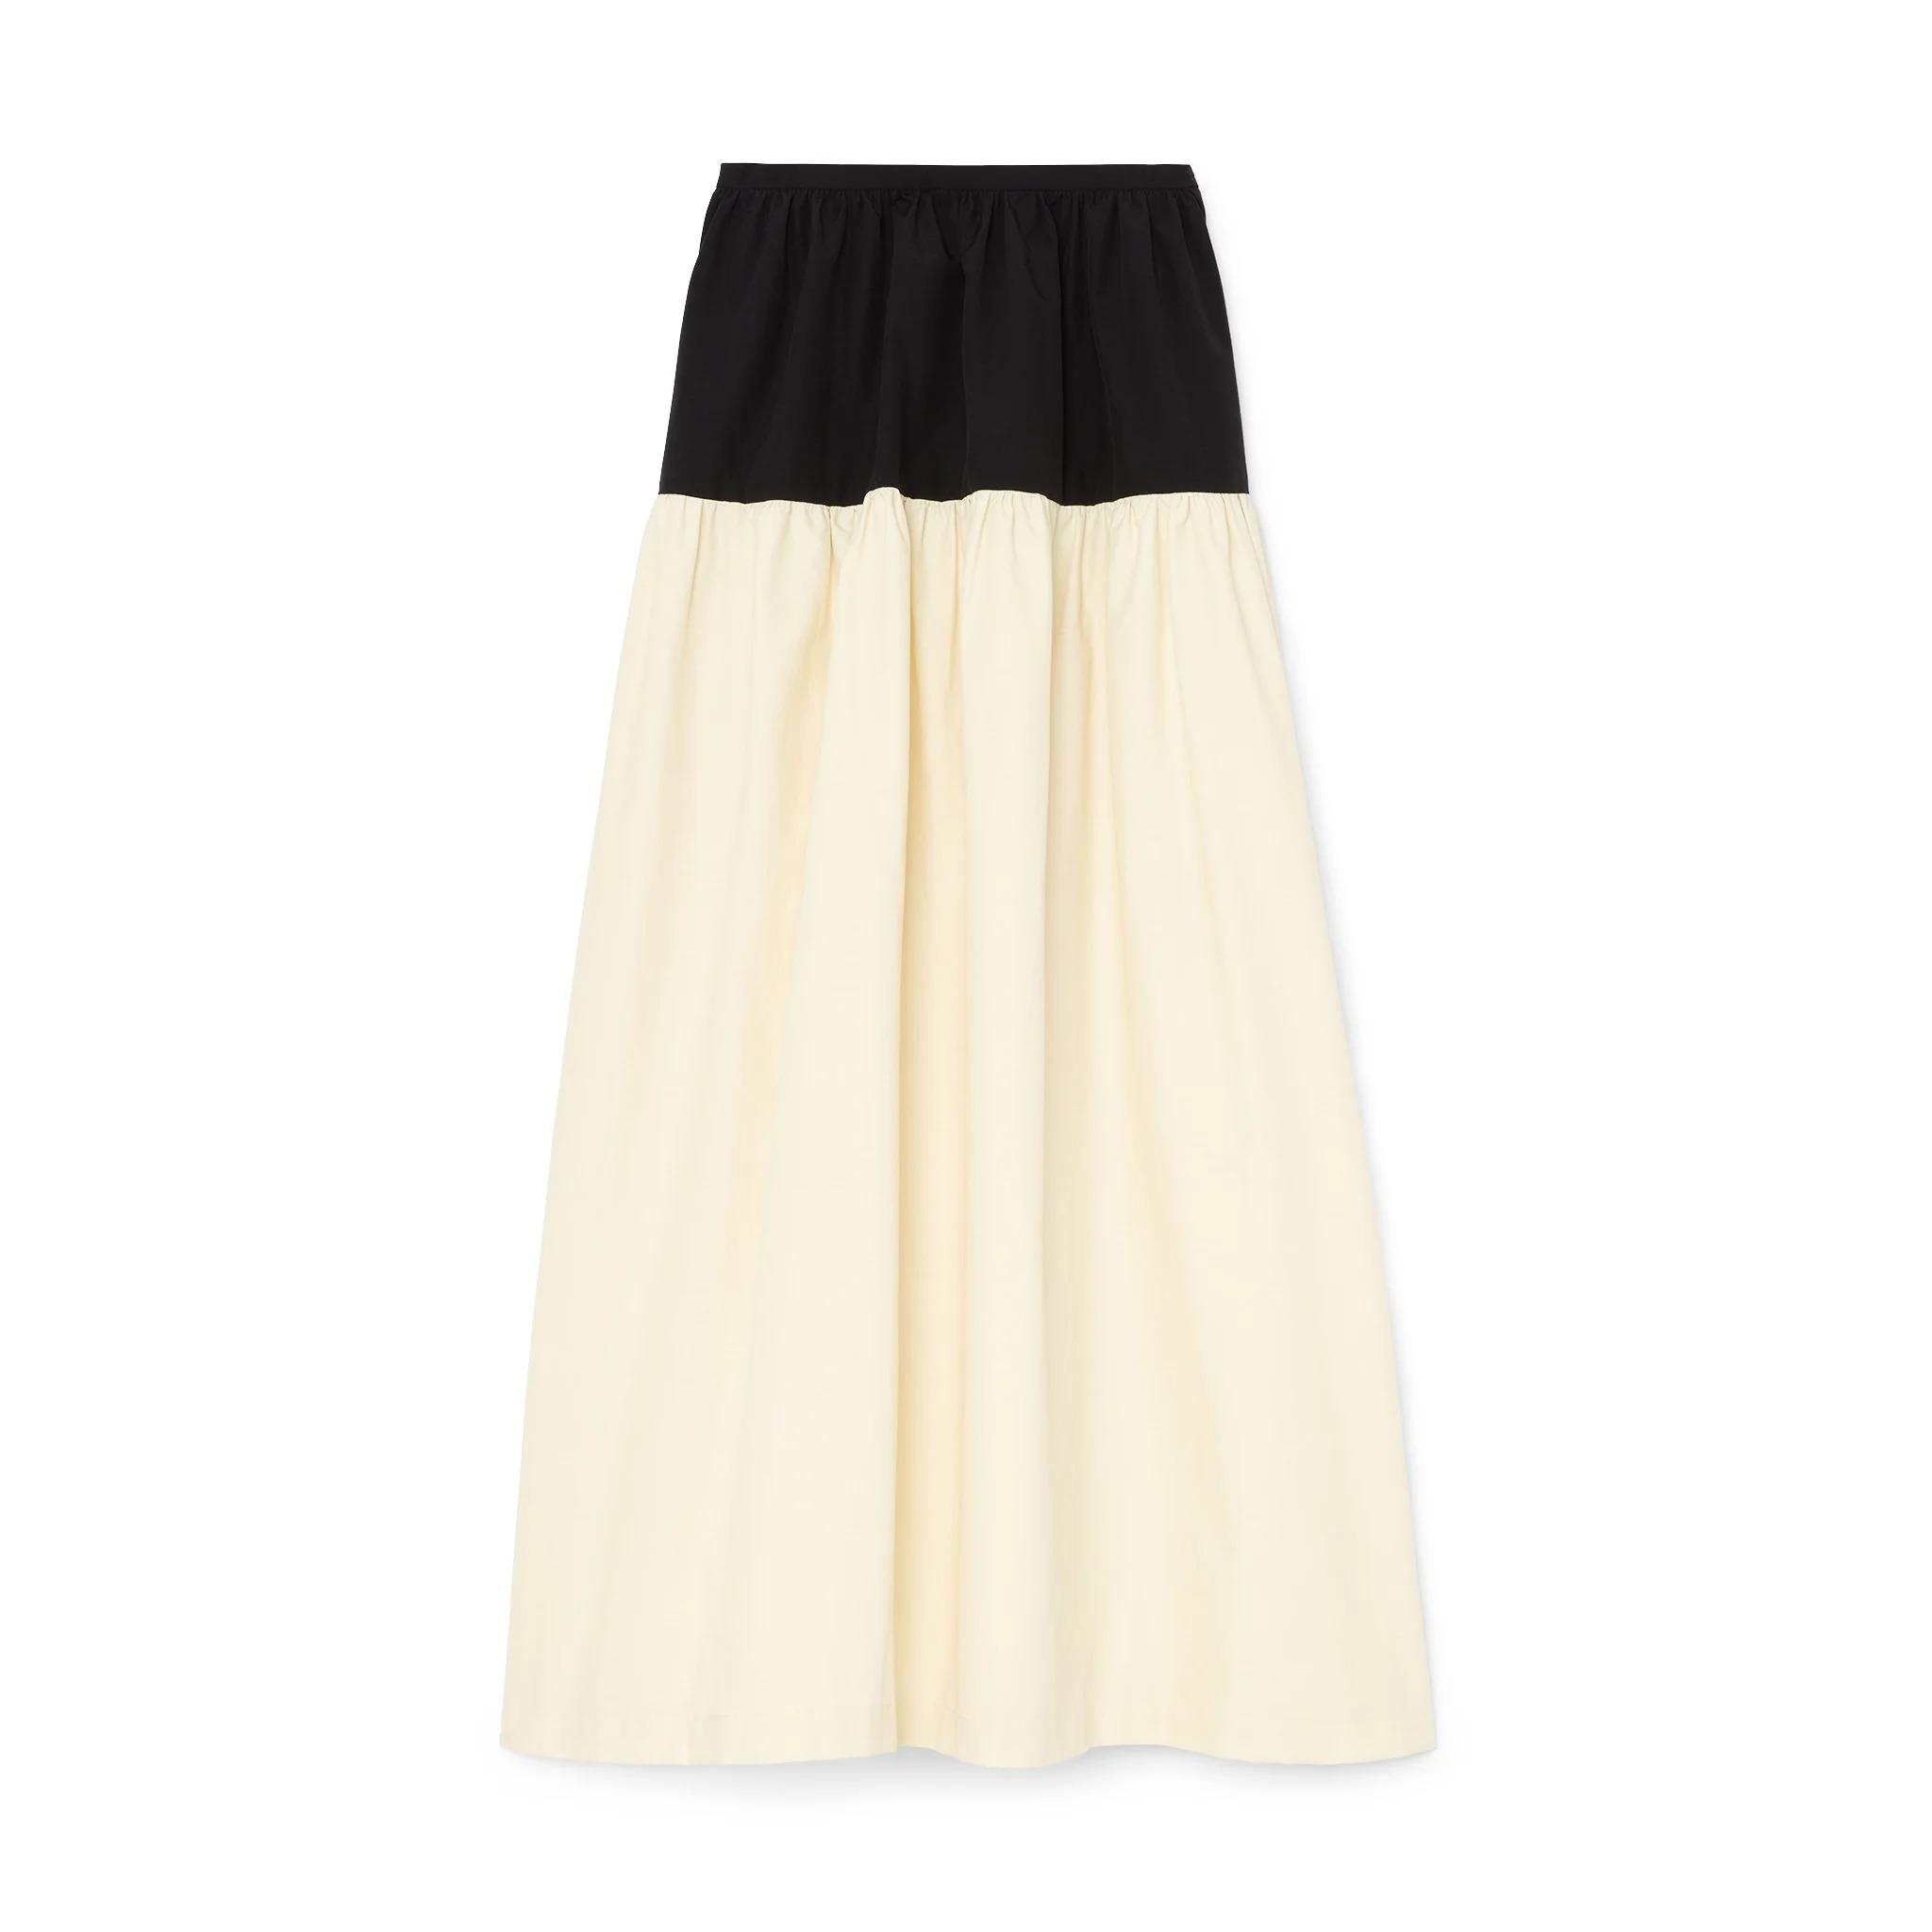 Ciao Lucia skirt